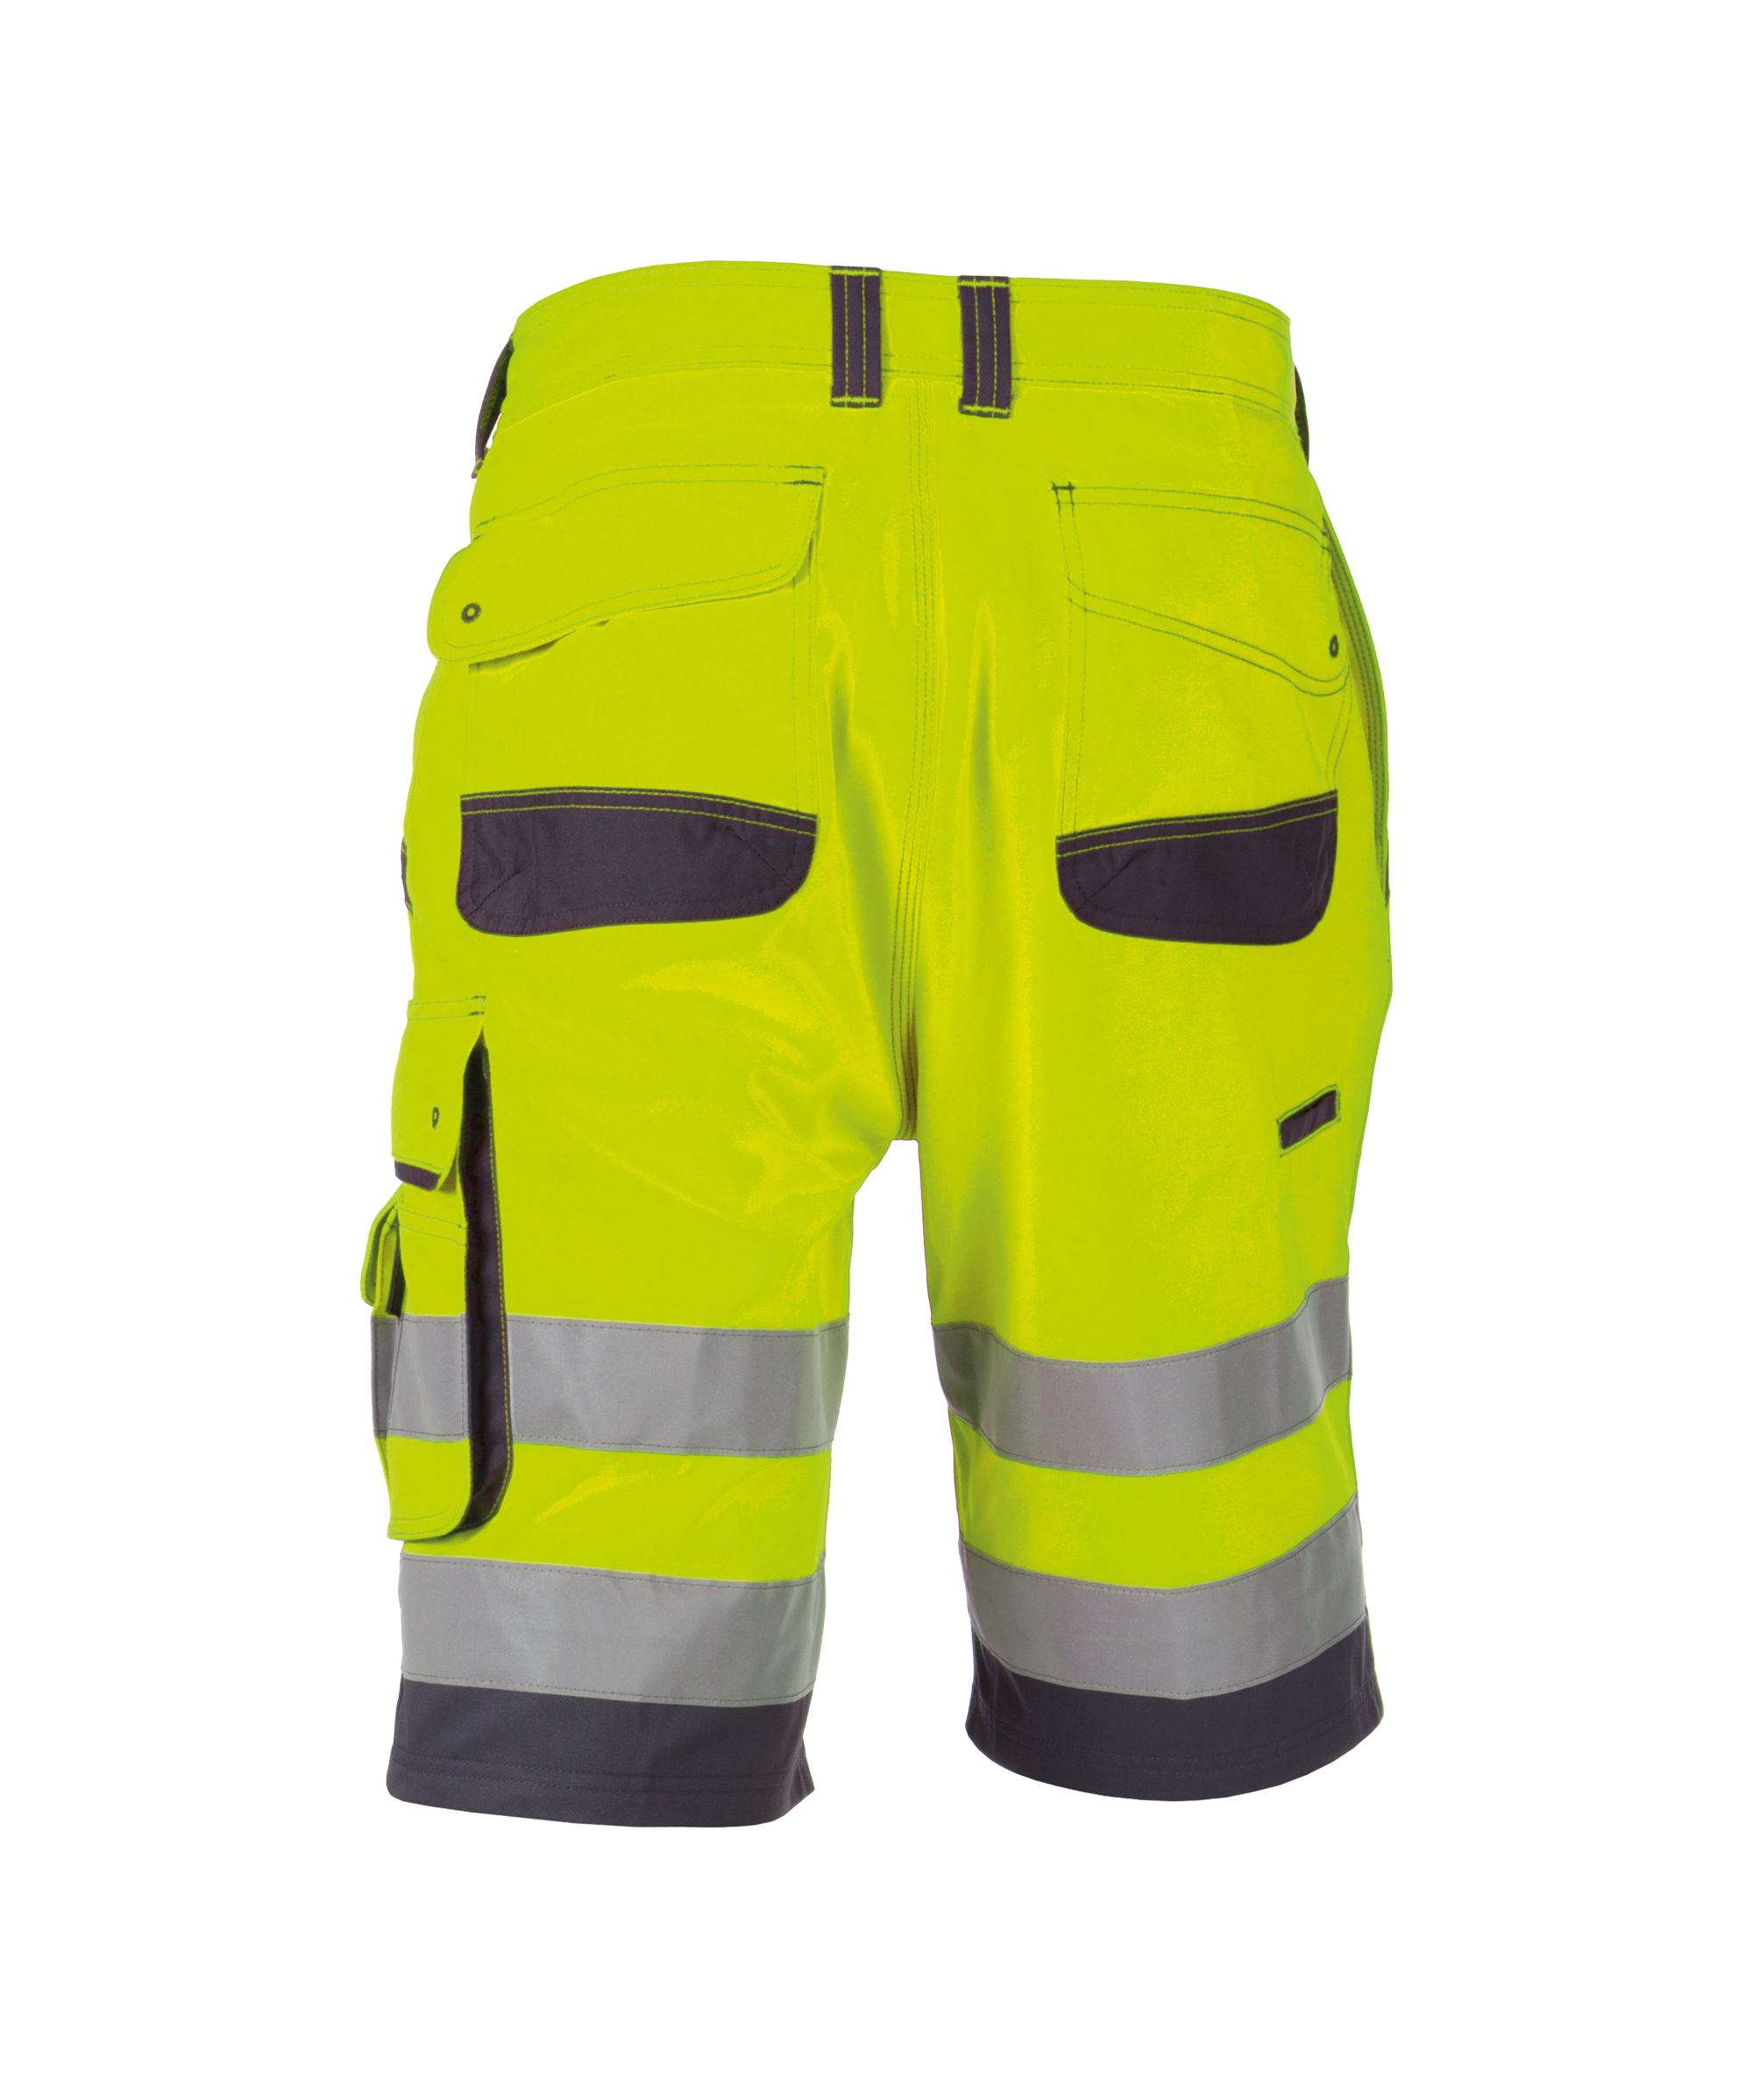 lucca_high-visibility-work-shorts_fluo-yellow-cement-grey_back.jpg